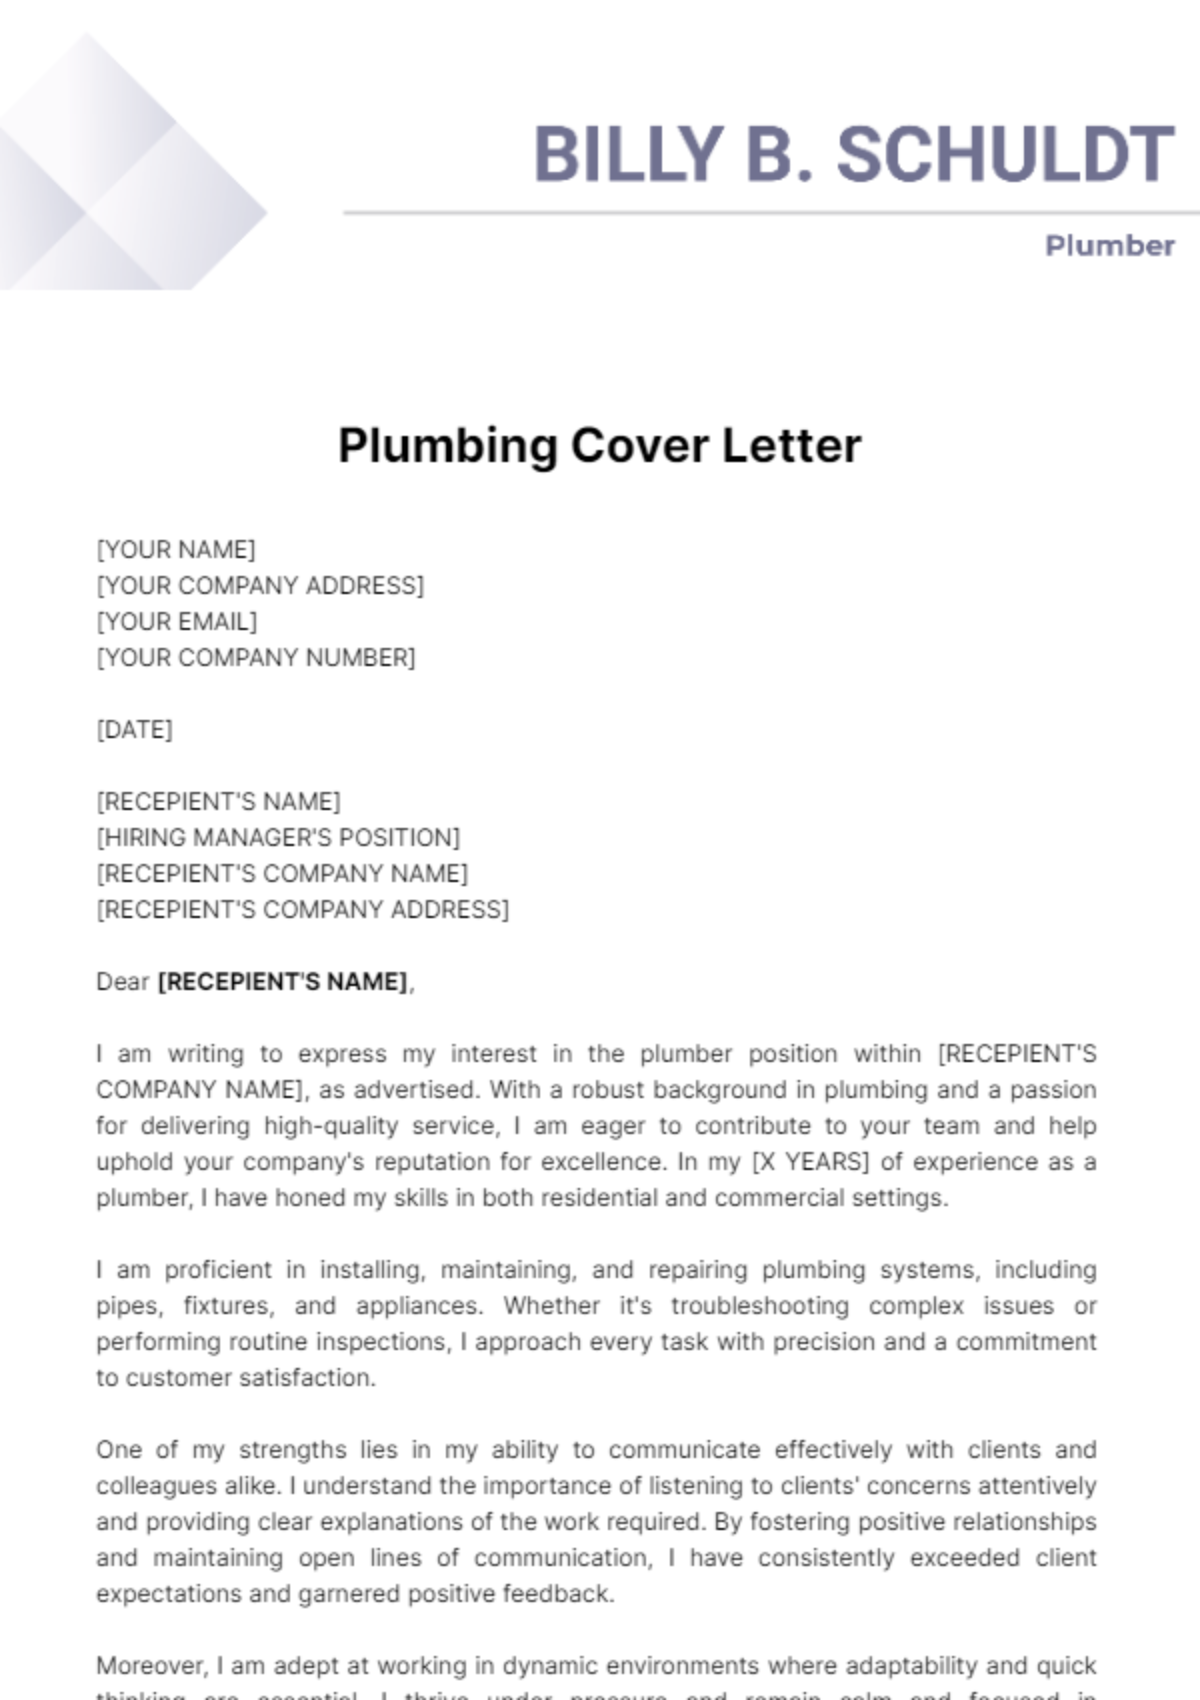 Plumbing Cover Letter Template